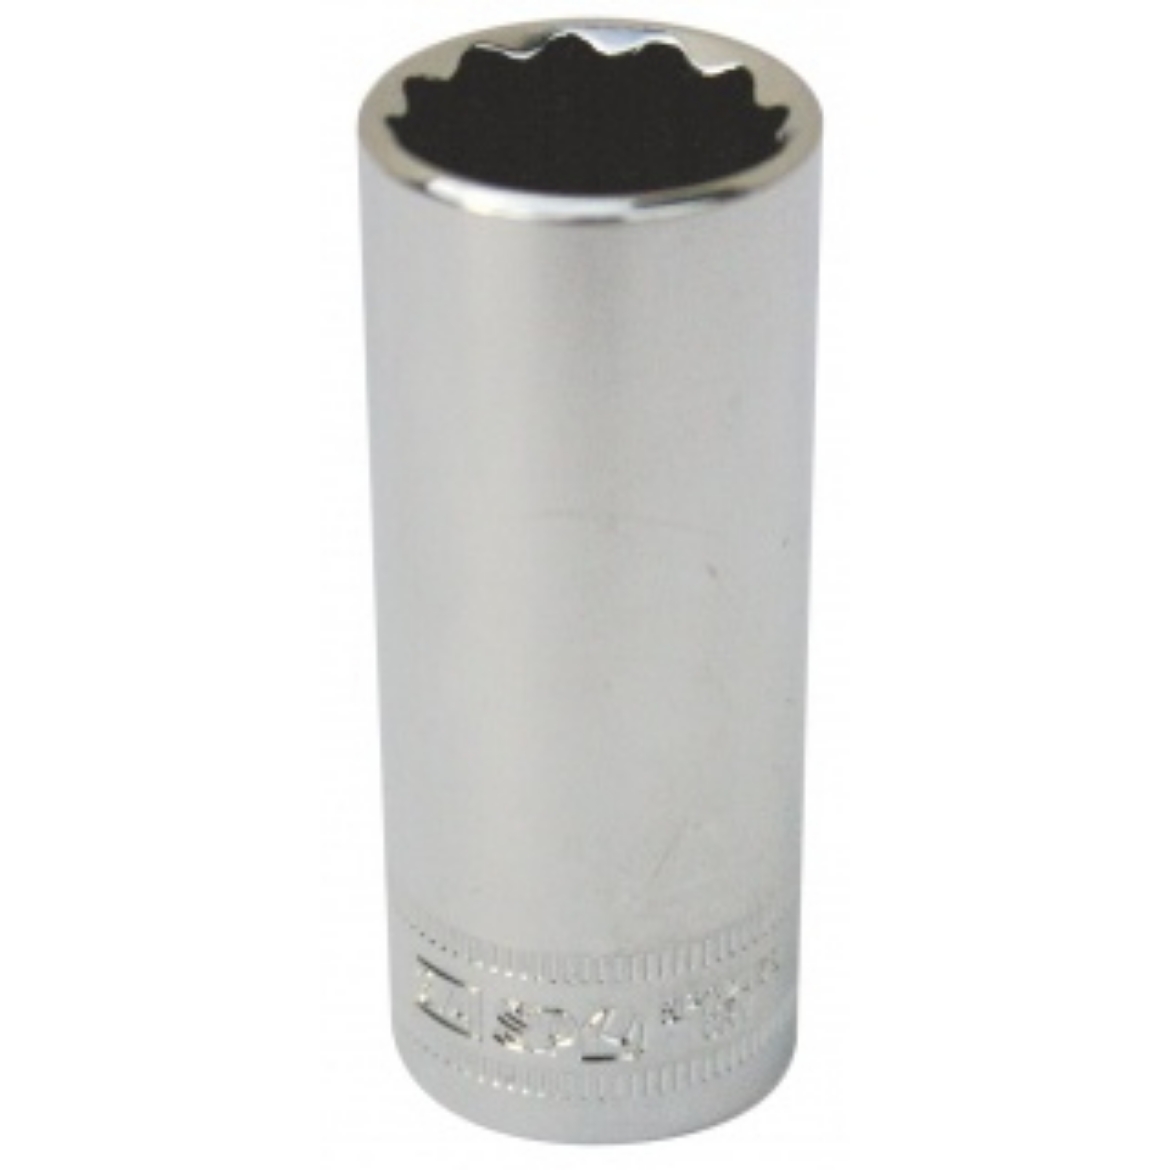 Picture of SOCKET DEEP 3/8"DR 12PT METRIC 18MM SP TOOLS